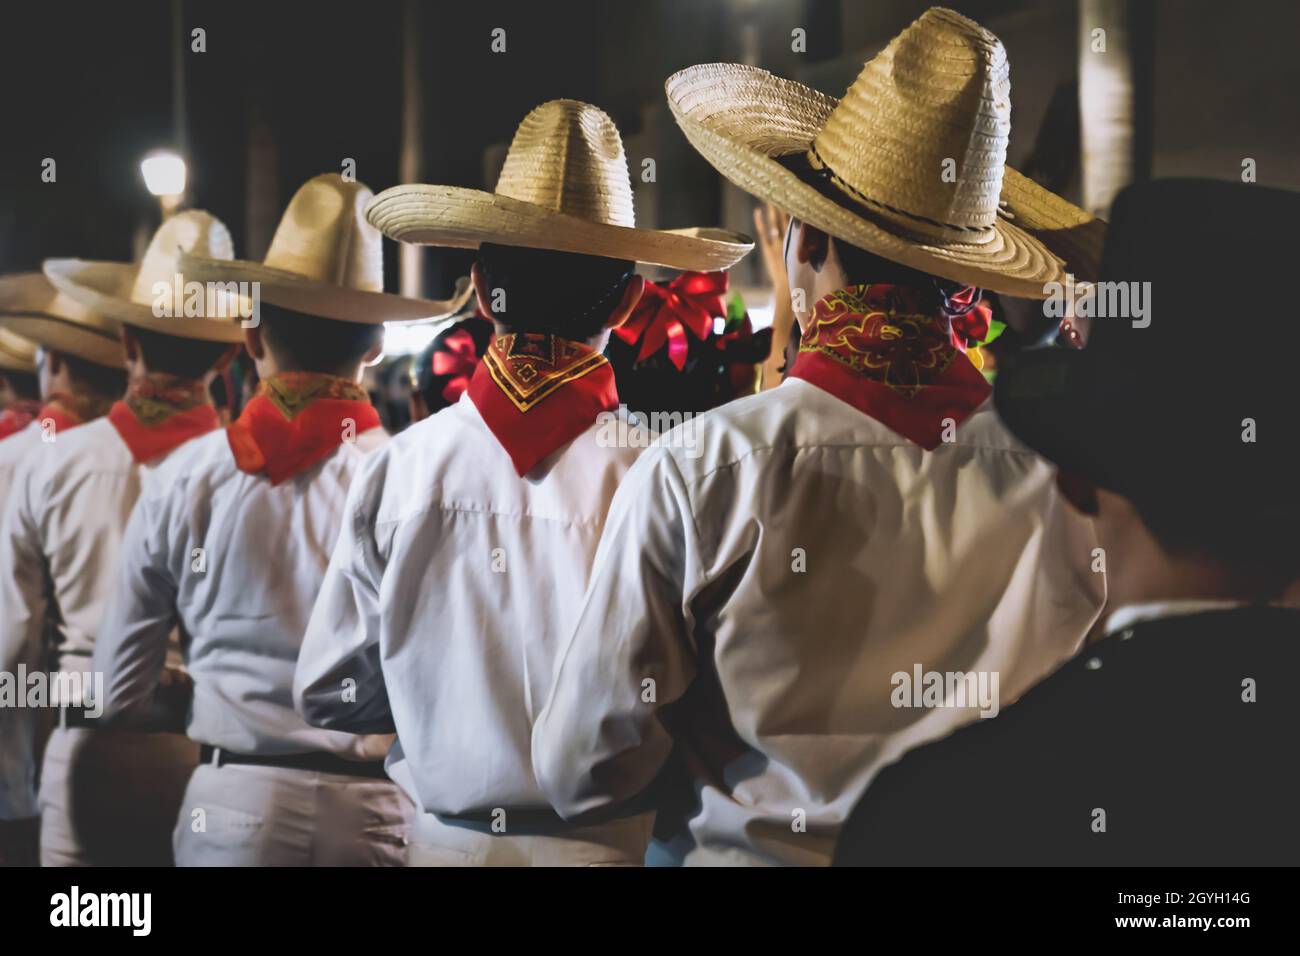 Merida, Mexico: 27 October 2018 - Men with traditional Mexican clothing and straw hats lining up before performance at 'Festival de las Animas' for da Stock Photo